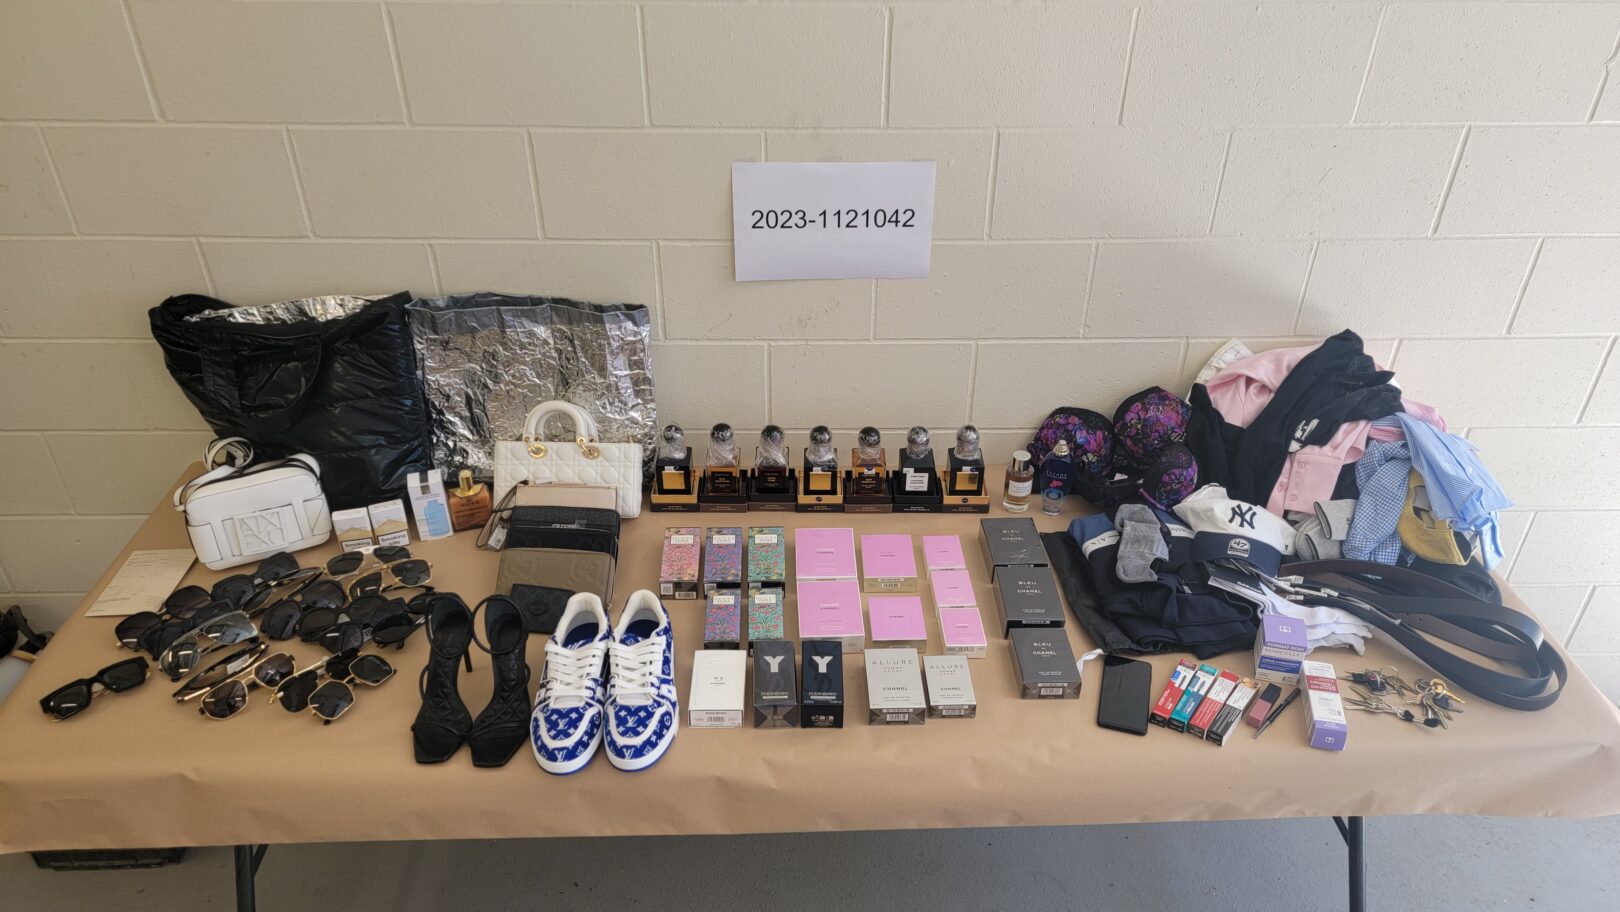 Recovered stolen items